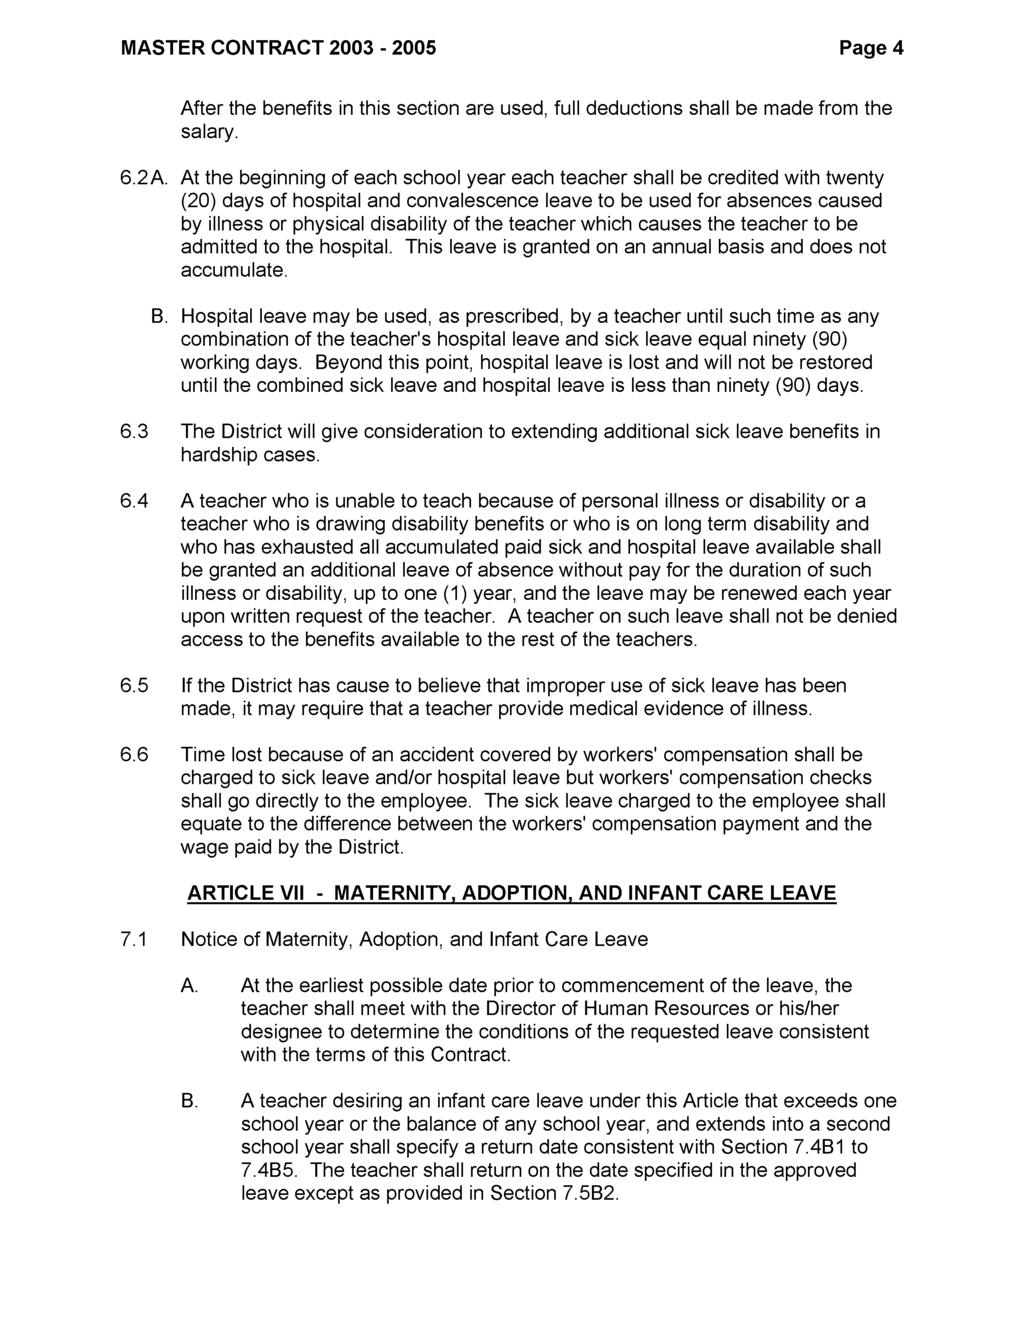 MASTER CONTRACT 2003-2005 Page 4 After the benefits in this section are used, full deductions shall be made from the salary. 6.2 A.